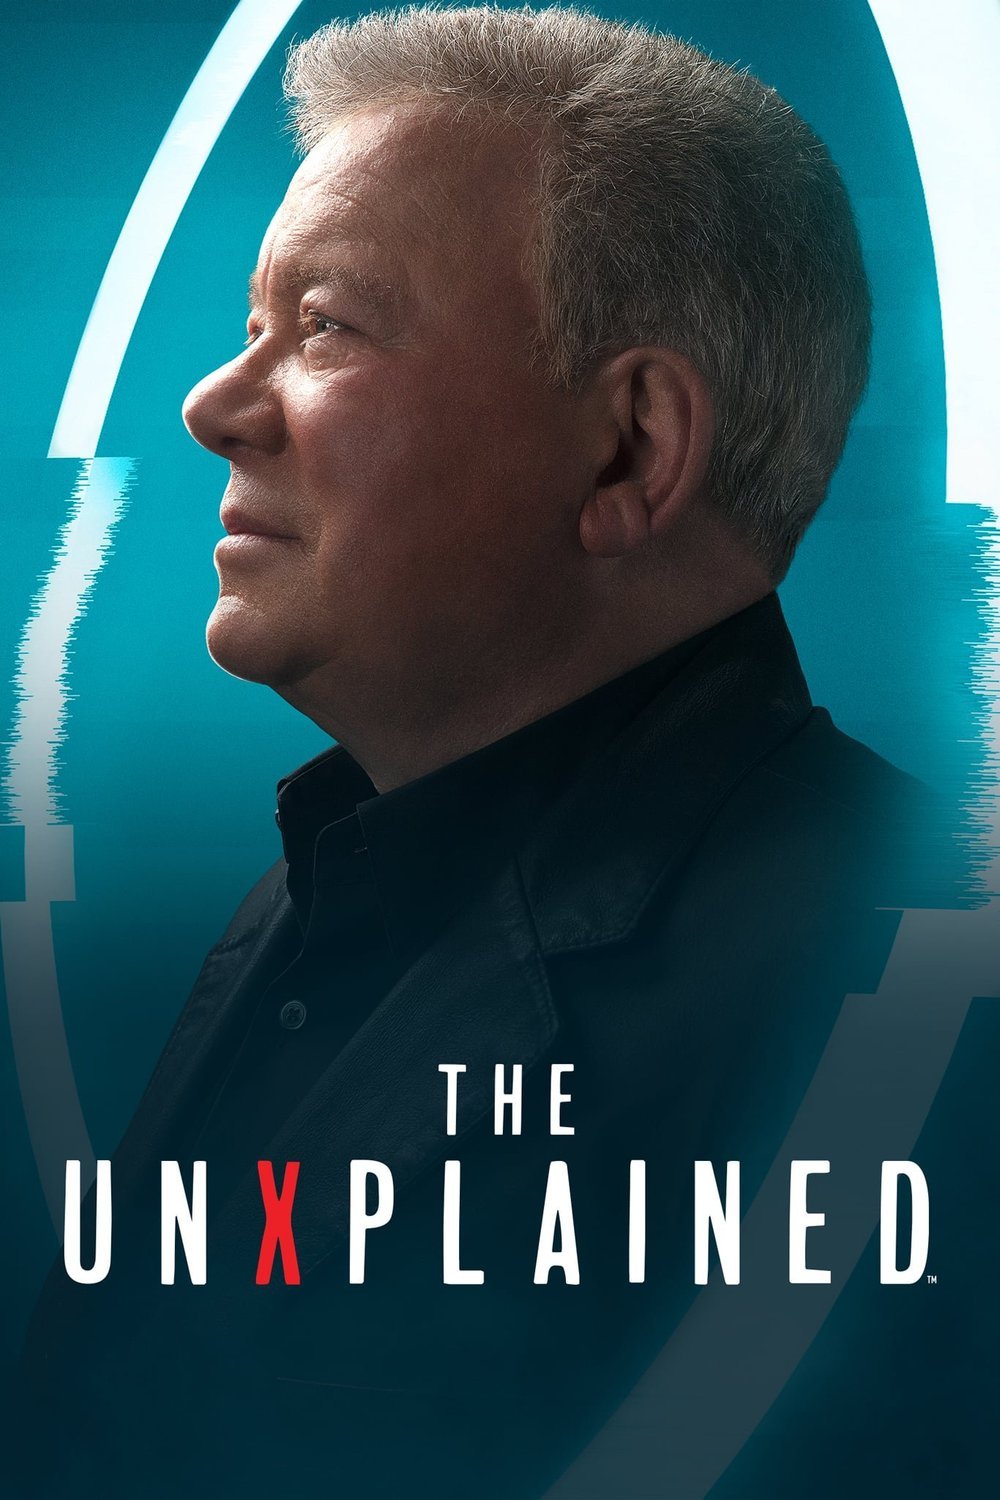 Poster of the movie The UnXplained